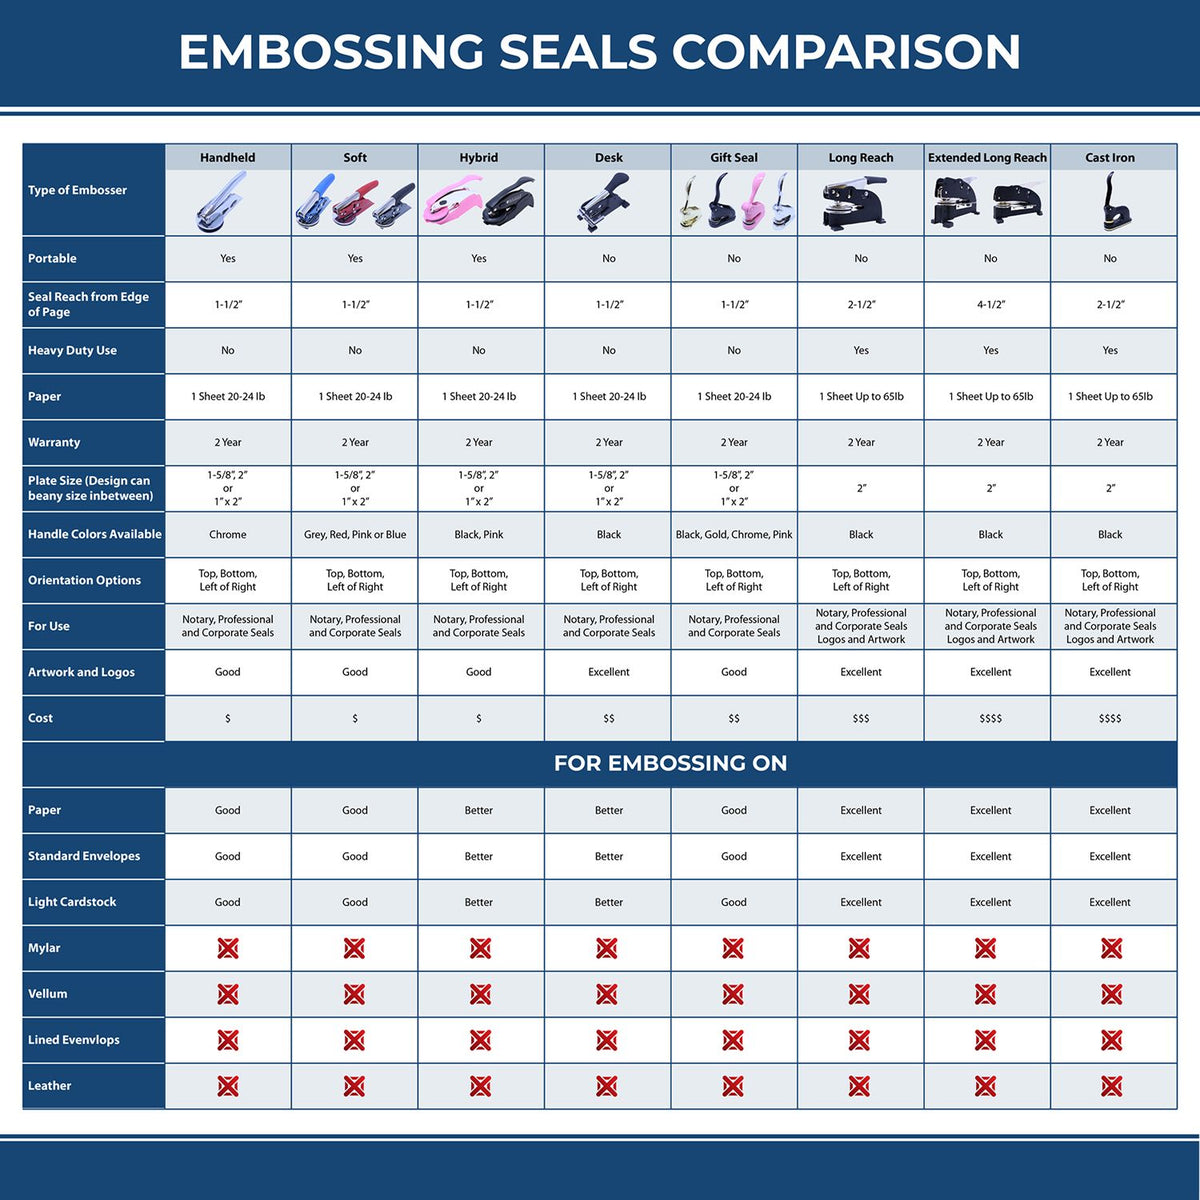 A comparison chart for the different types of mount models available for the Handheld District of Columbia Professional Geologist Embosser